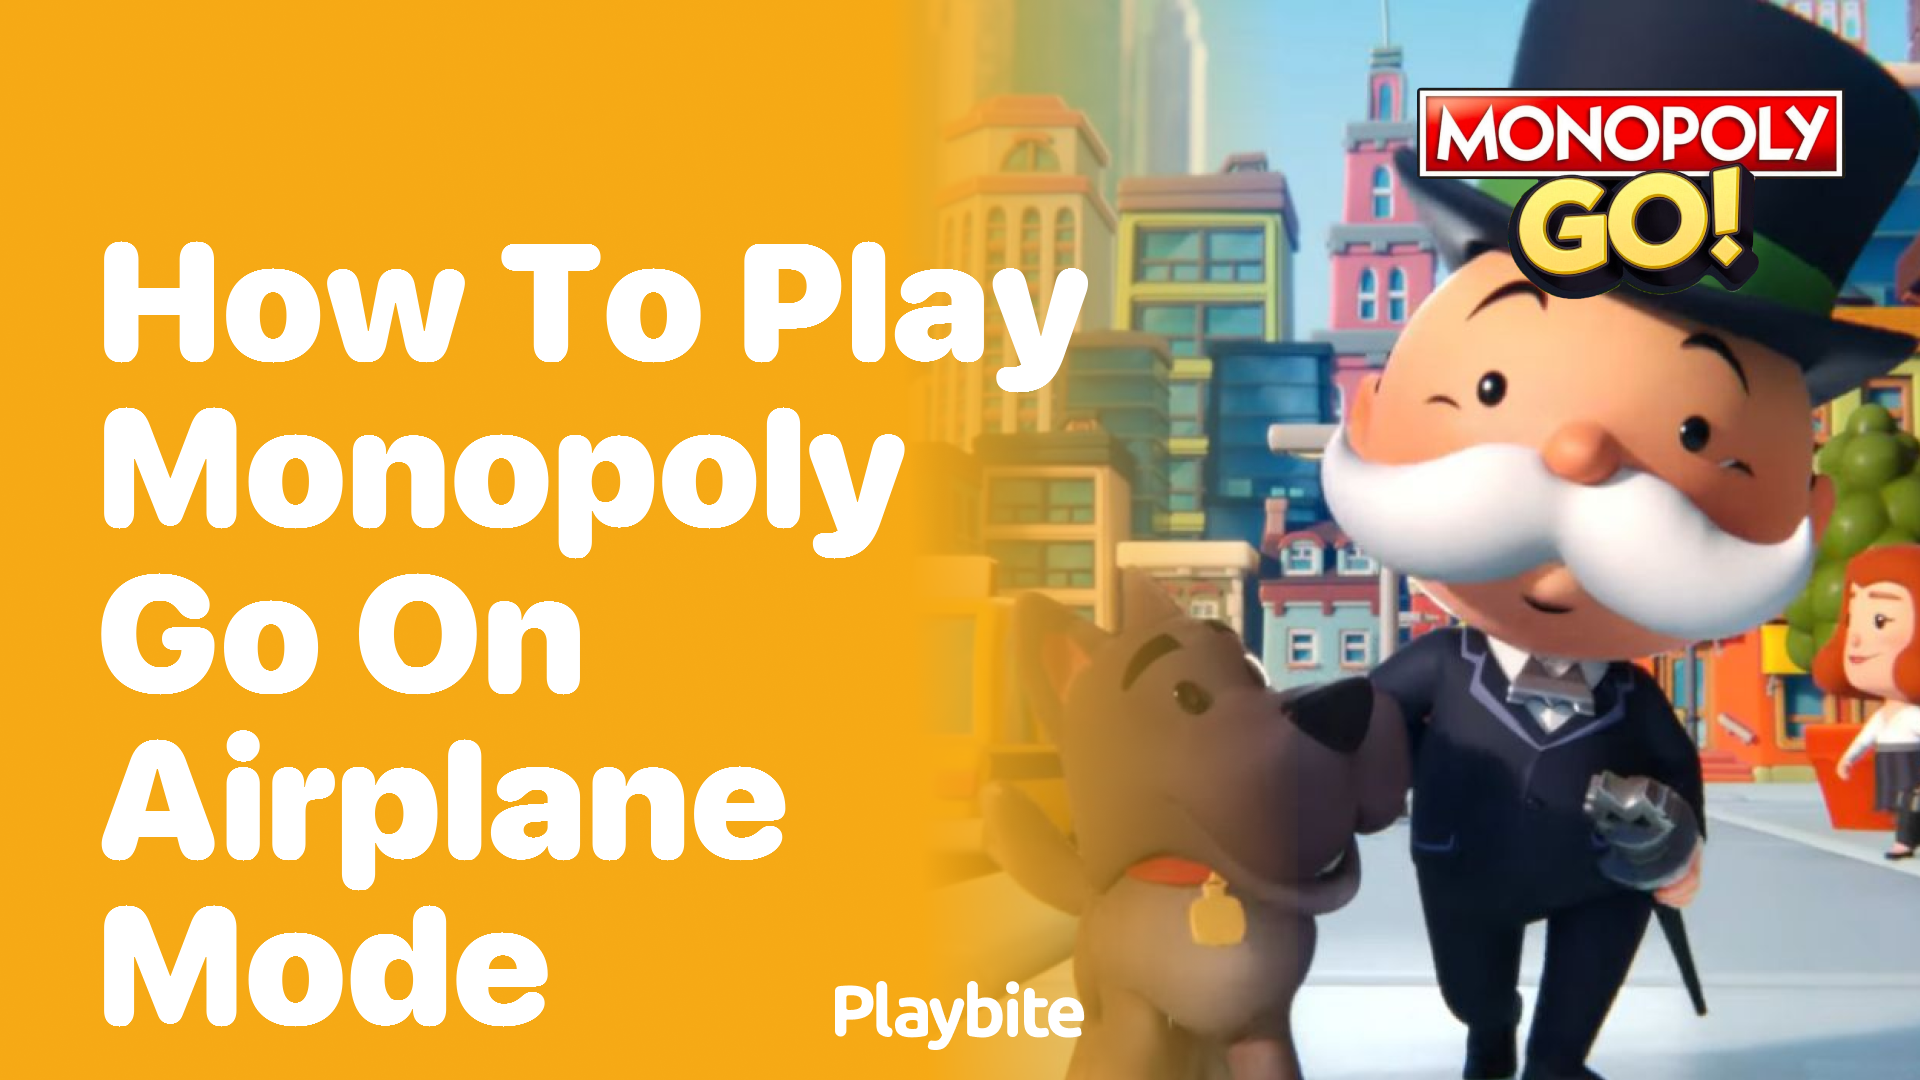 How to Play Monopoly Go on Airplane Mode?